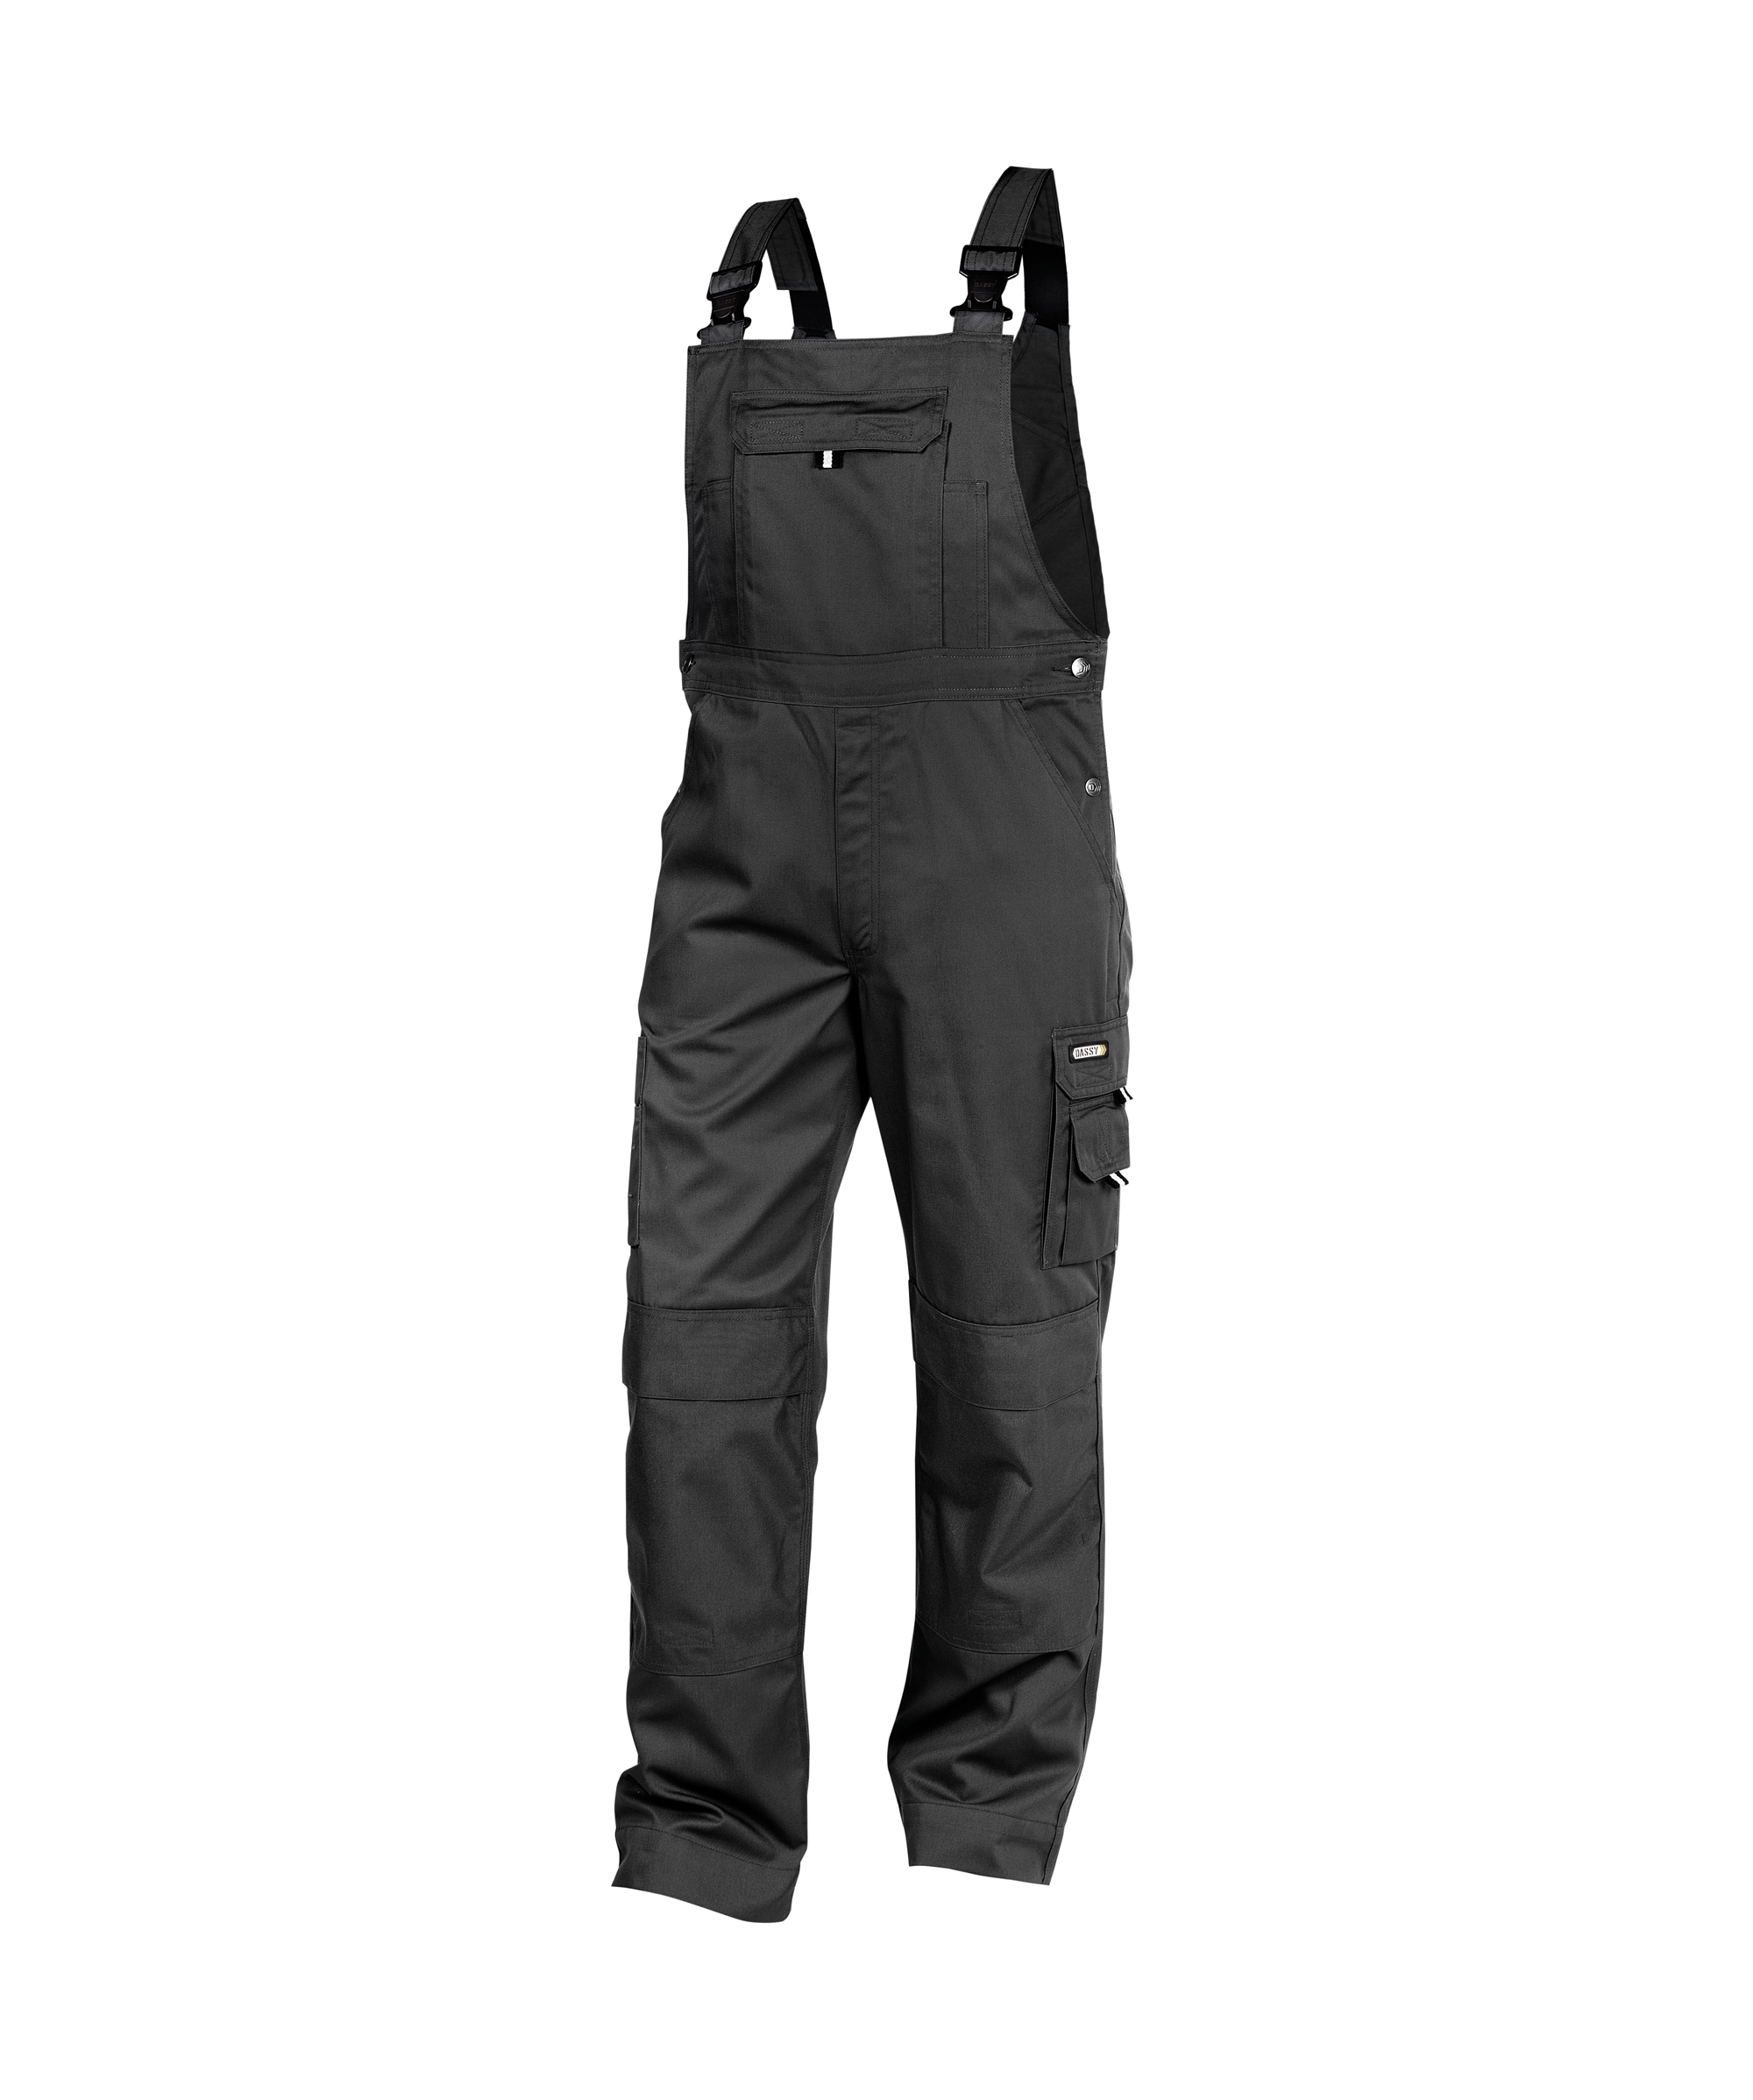 ventura_brace-overall-with-knee-pockets_black_front.jpg